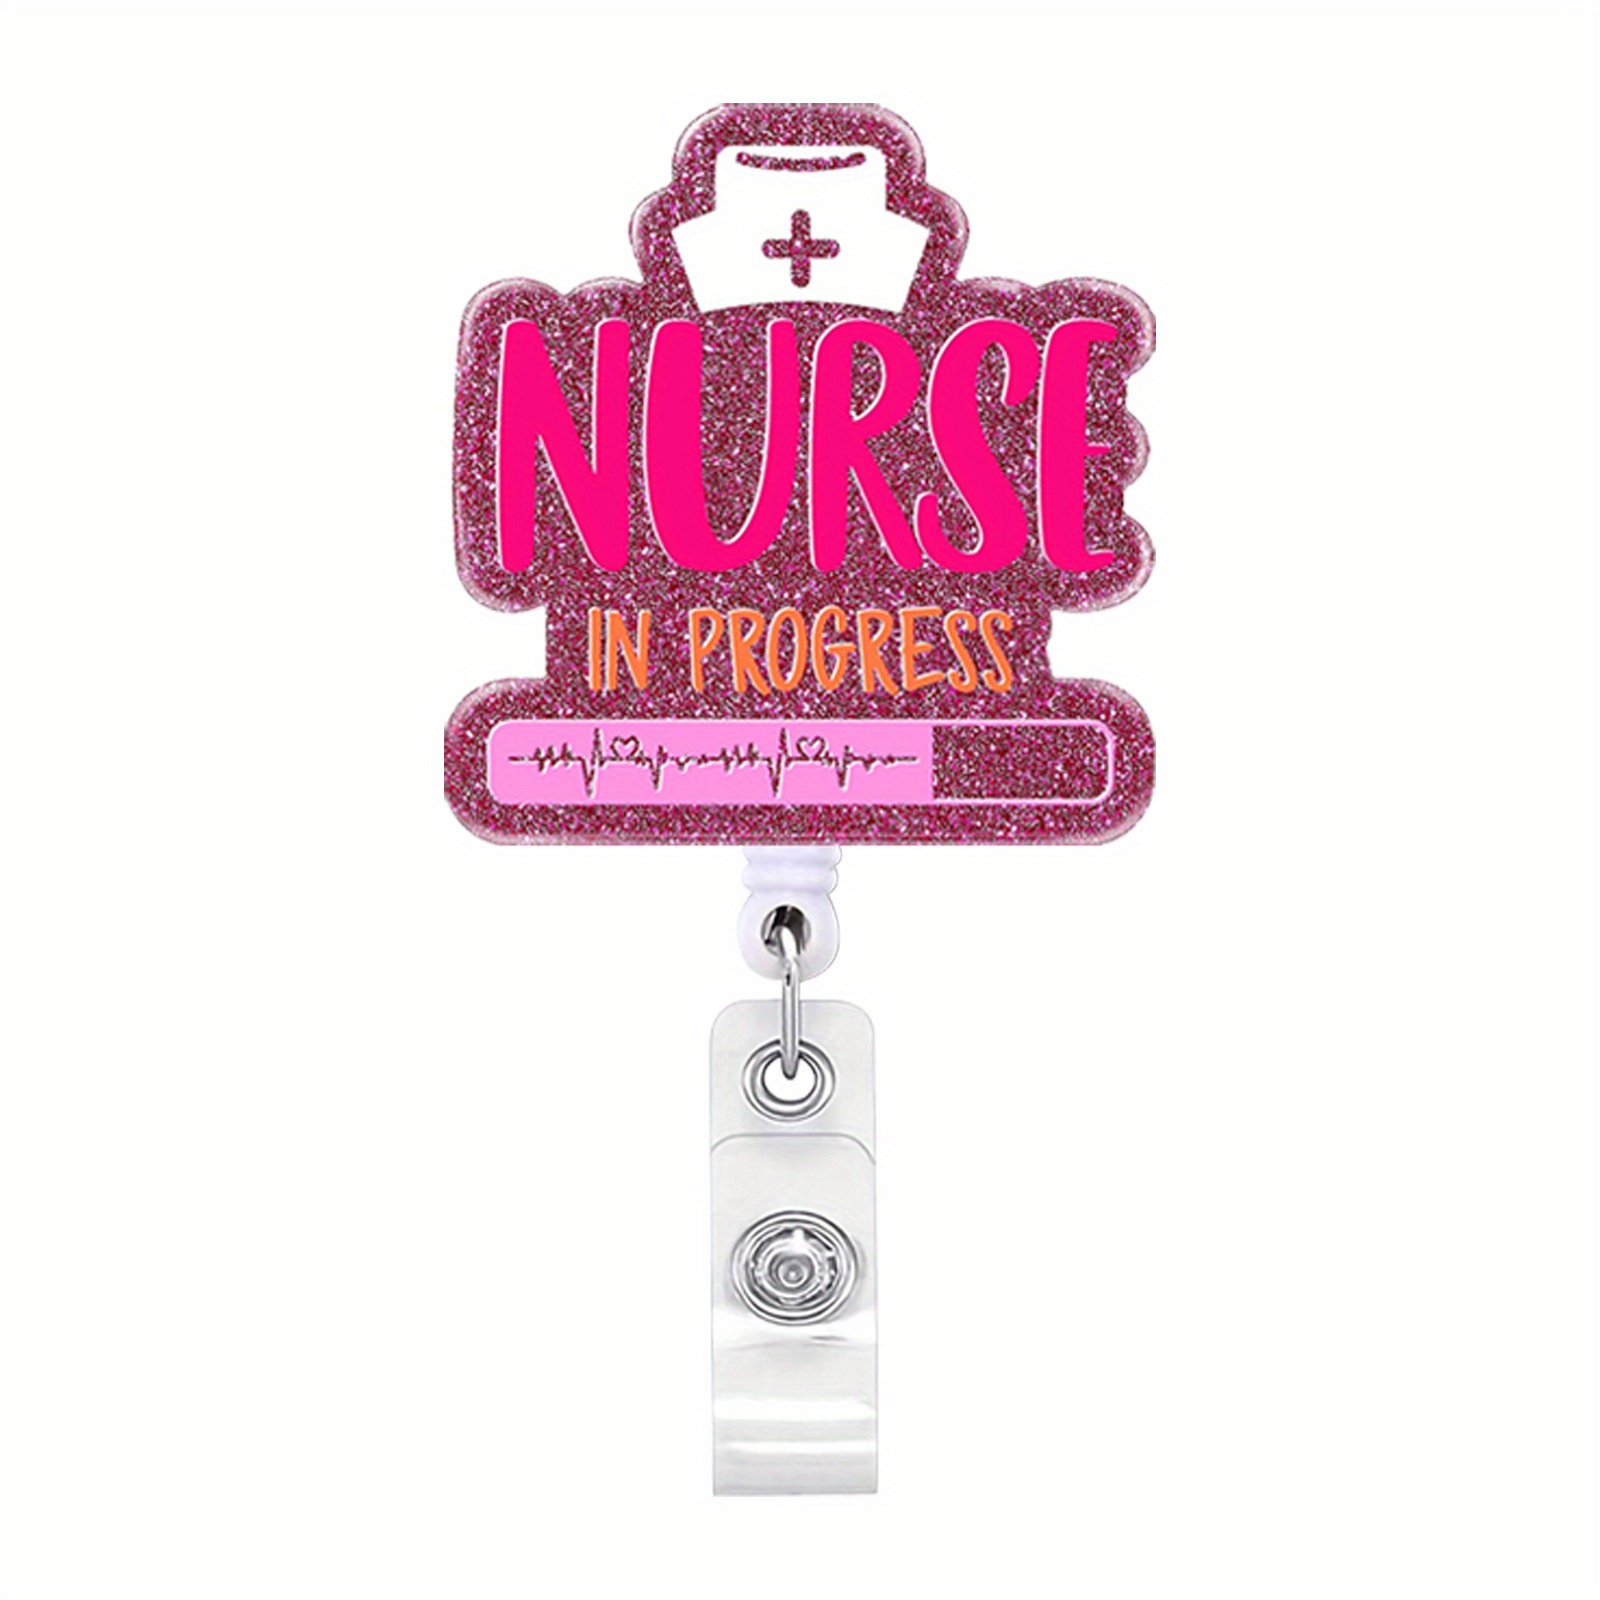 Stephany the Stomach Pink Felt Badge Reel Nurse Retractable ID Badge Holder  Embroidered Name Tag Pull Alligator or Slide Clip 